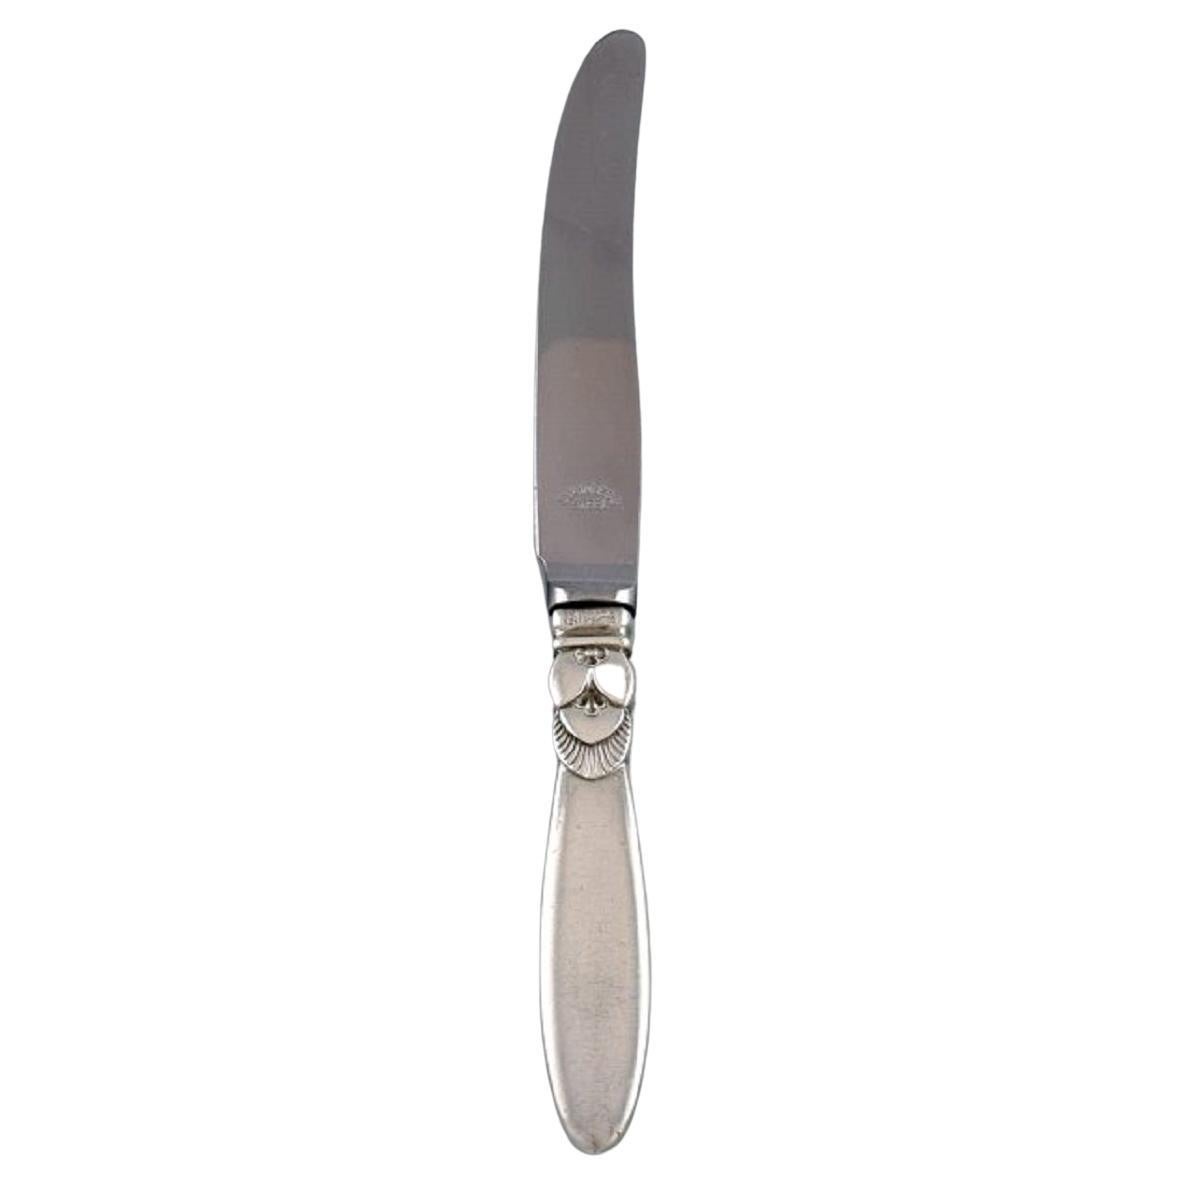 Georg Jensen Cactus Lunch Knife in Sterling Silver and Stainless Steel